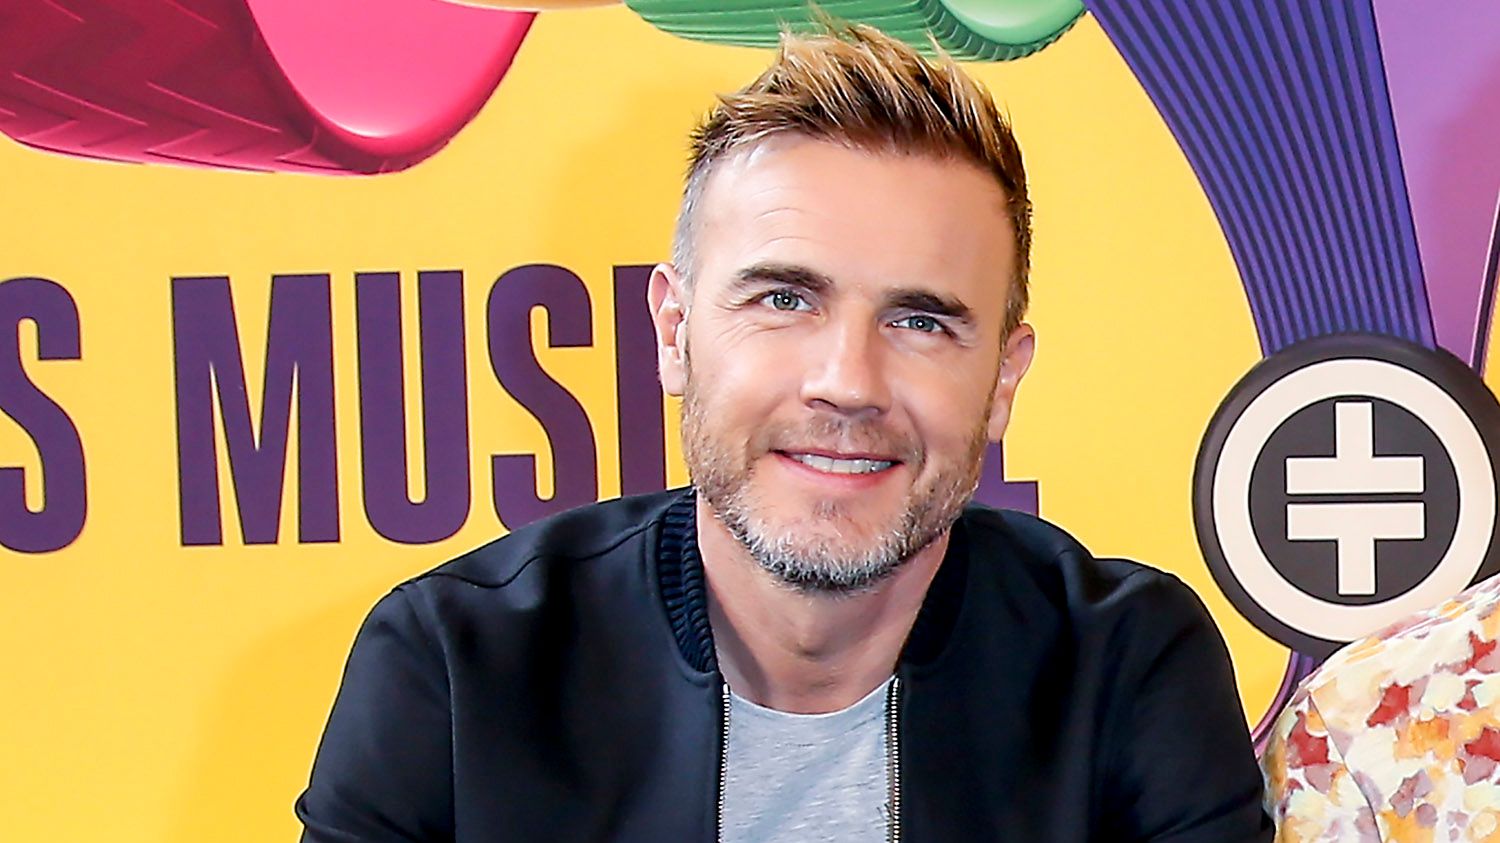 Gary Barlow shares adorable anniversary tribute to wife Dawn